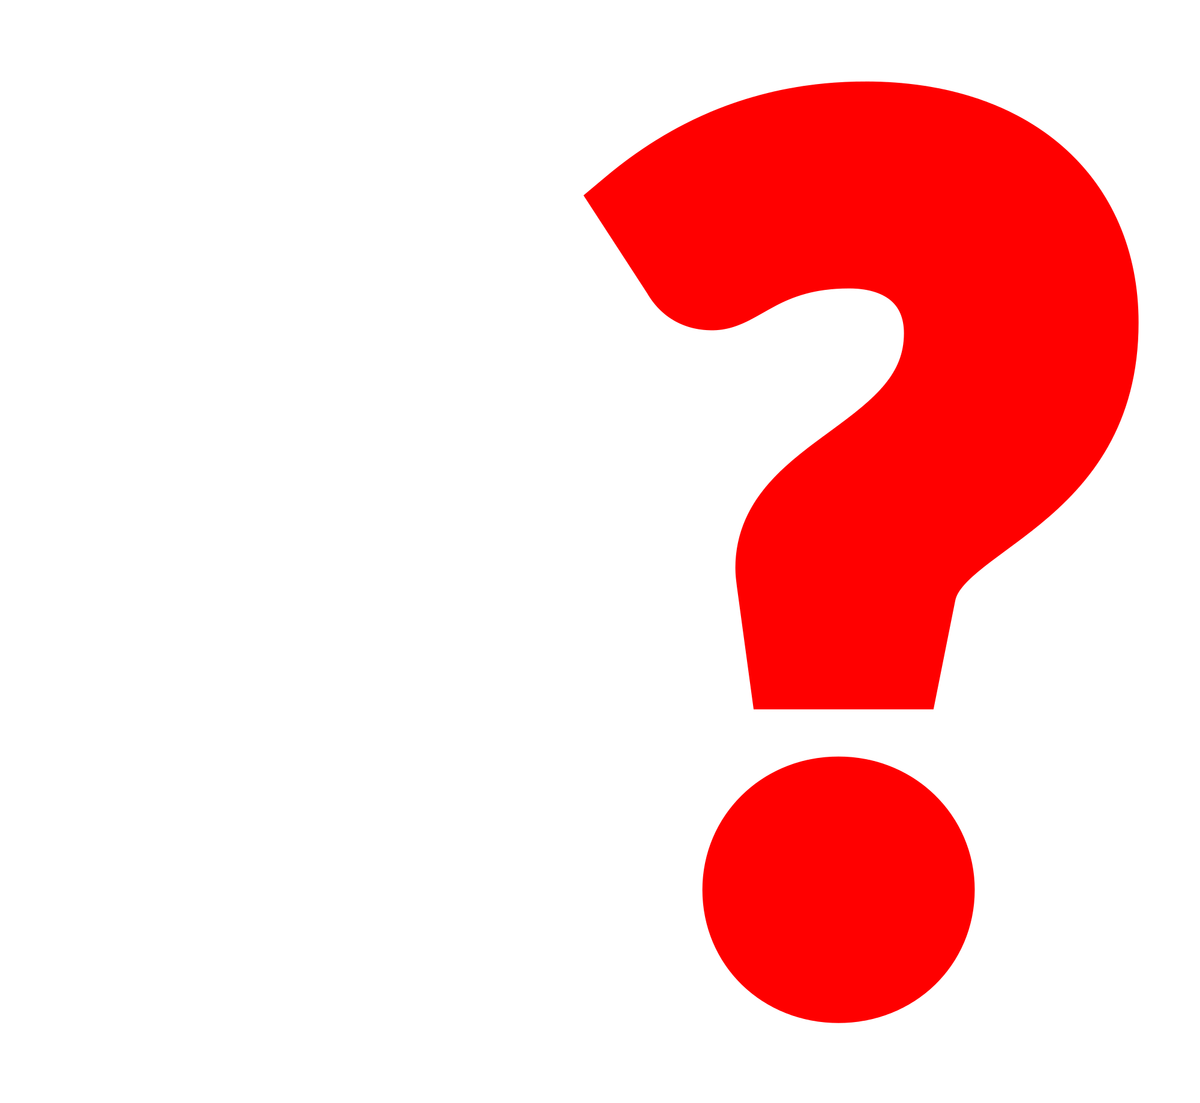 Question Mark PNG Transparent Images - PNG All